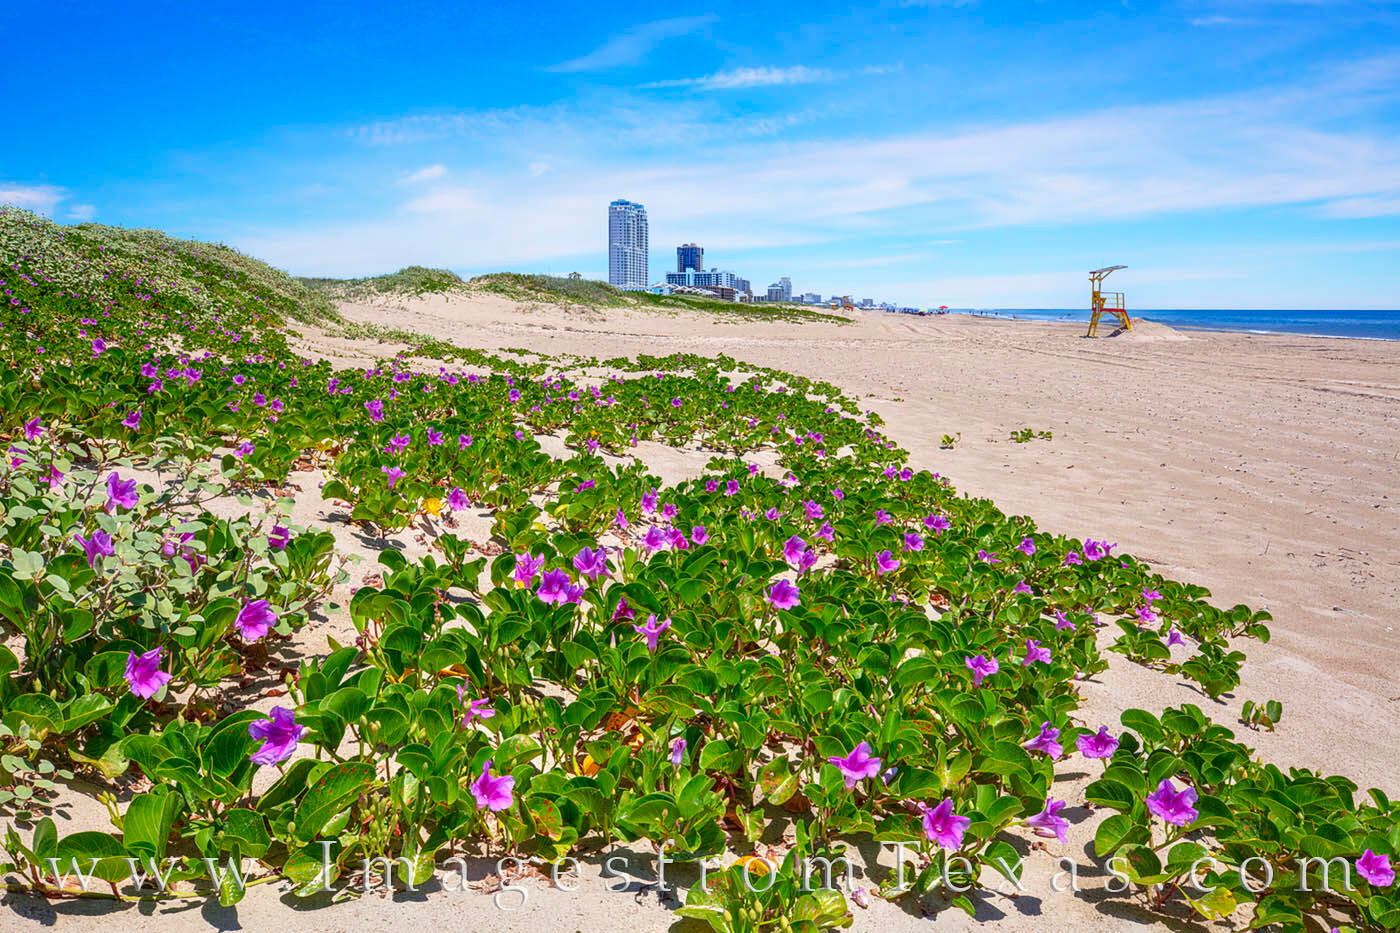 With the modest skyline of South Padre rising from the dunes, pink and violet blooms of Morning Glories slide down the sandy...